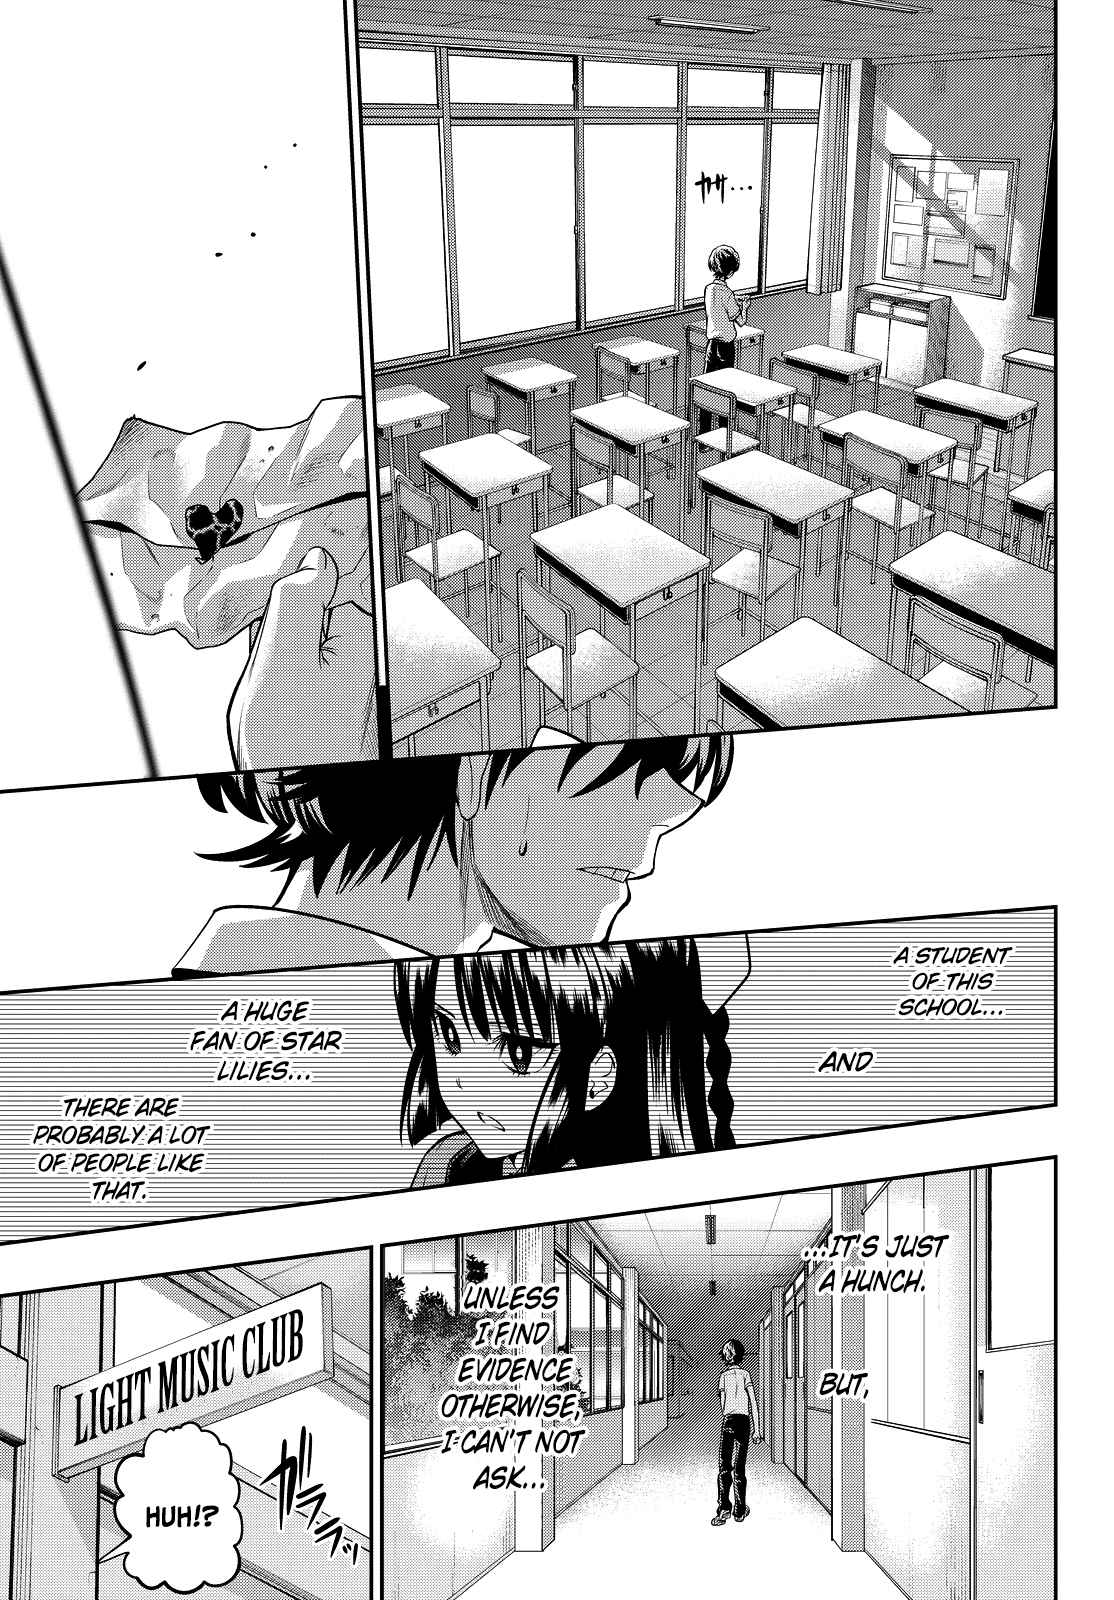 Hoshino, Me O Tsubutte Vol. 5 Ch. 35 Letter ~On the Approaching Music~